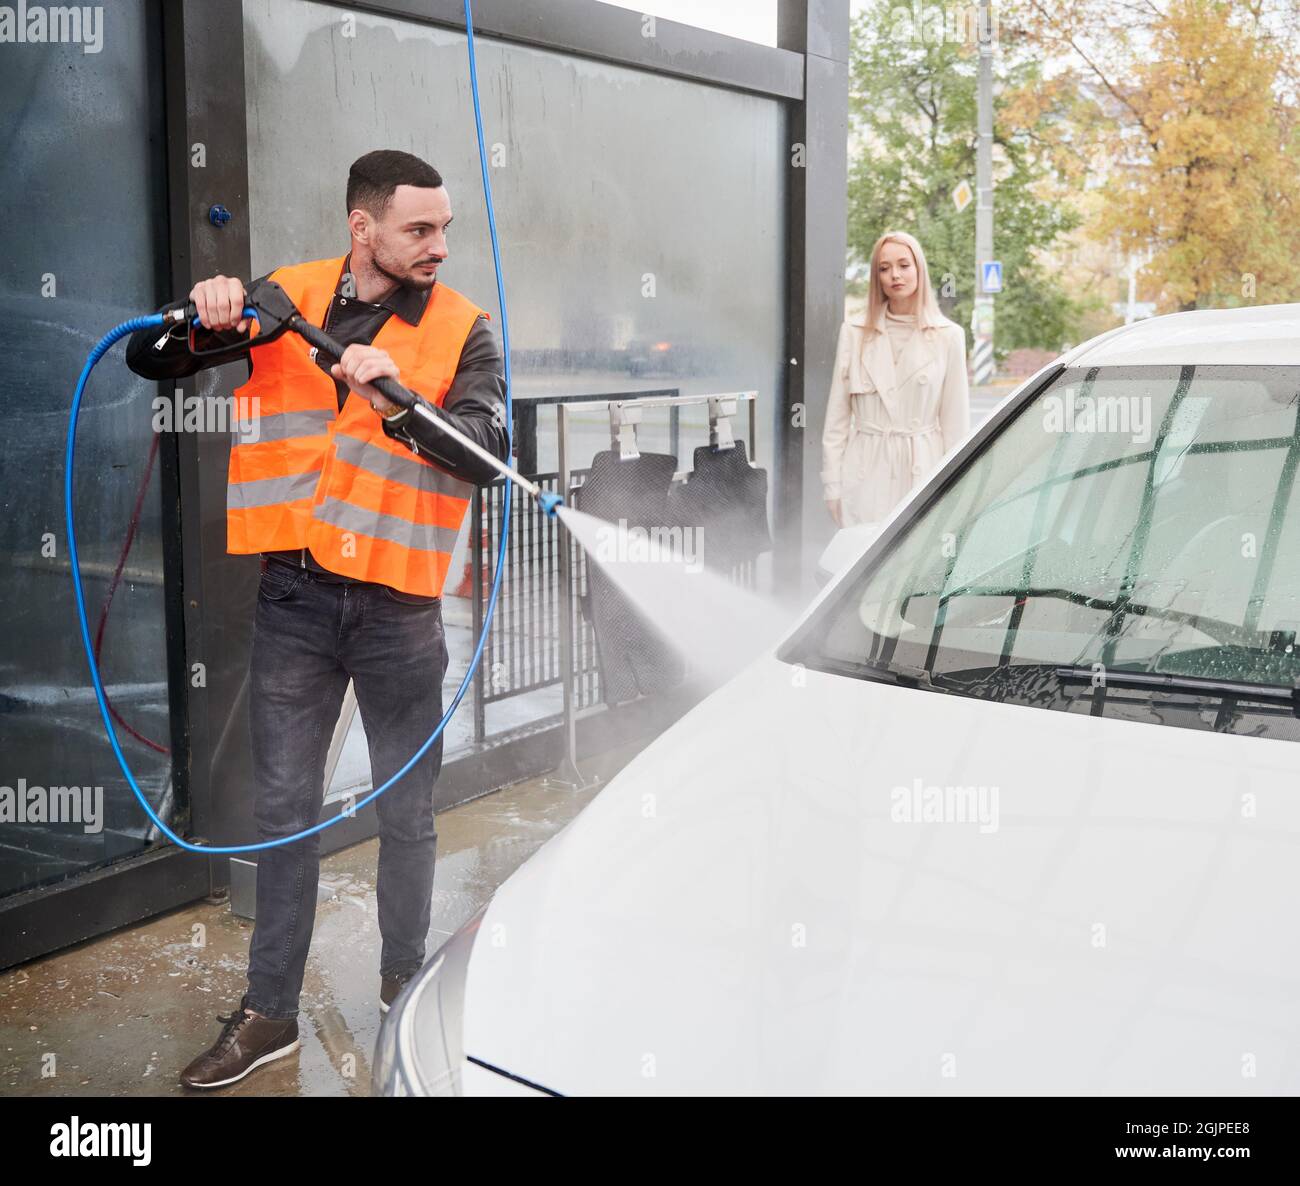 Young man washing car on carwash station outdoor, wearing orange vest. Handsome worker cleaning automobile, using high pressure water. Stock Photo